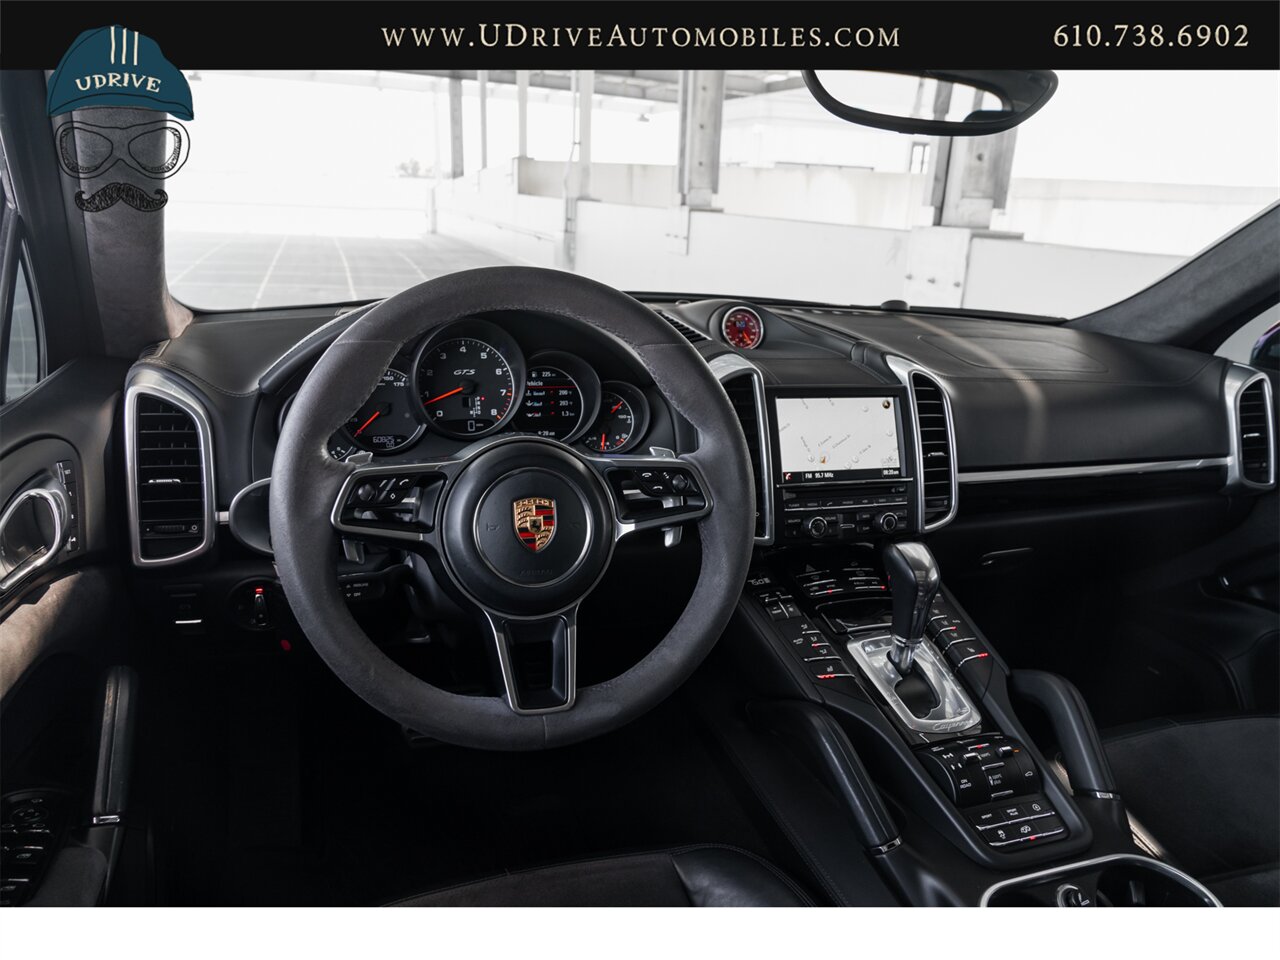 2016 Porsche Cayenne GTS  CPO Warranty 21in Whls Sport Chrono Red Dial Alcantara Red Belts Pano - Photo 6 - West Chester, PA 19382